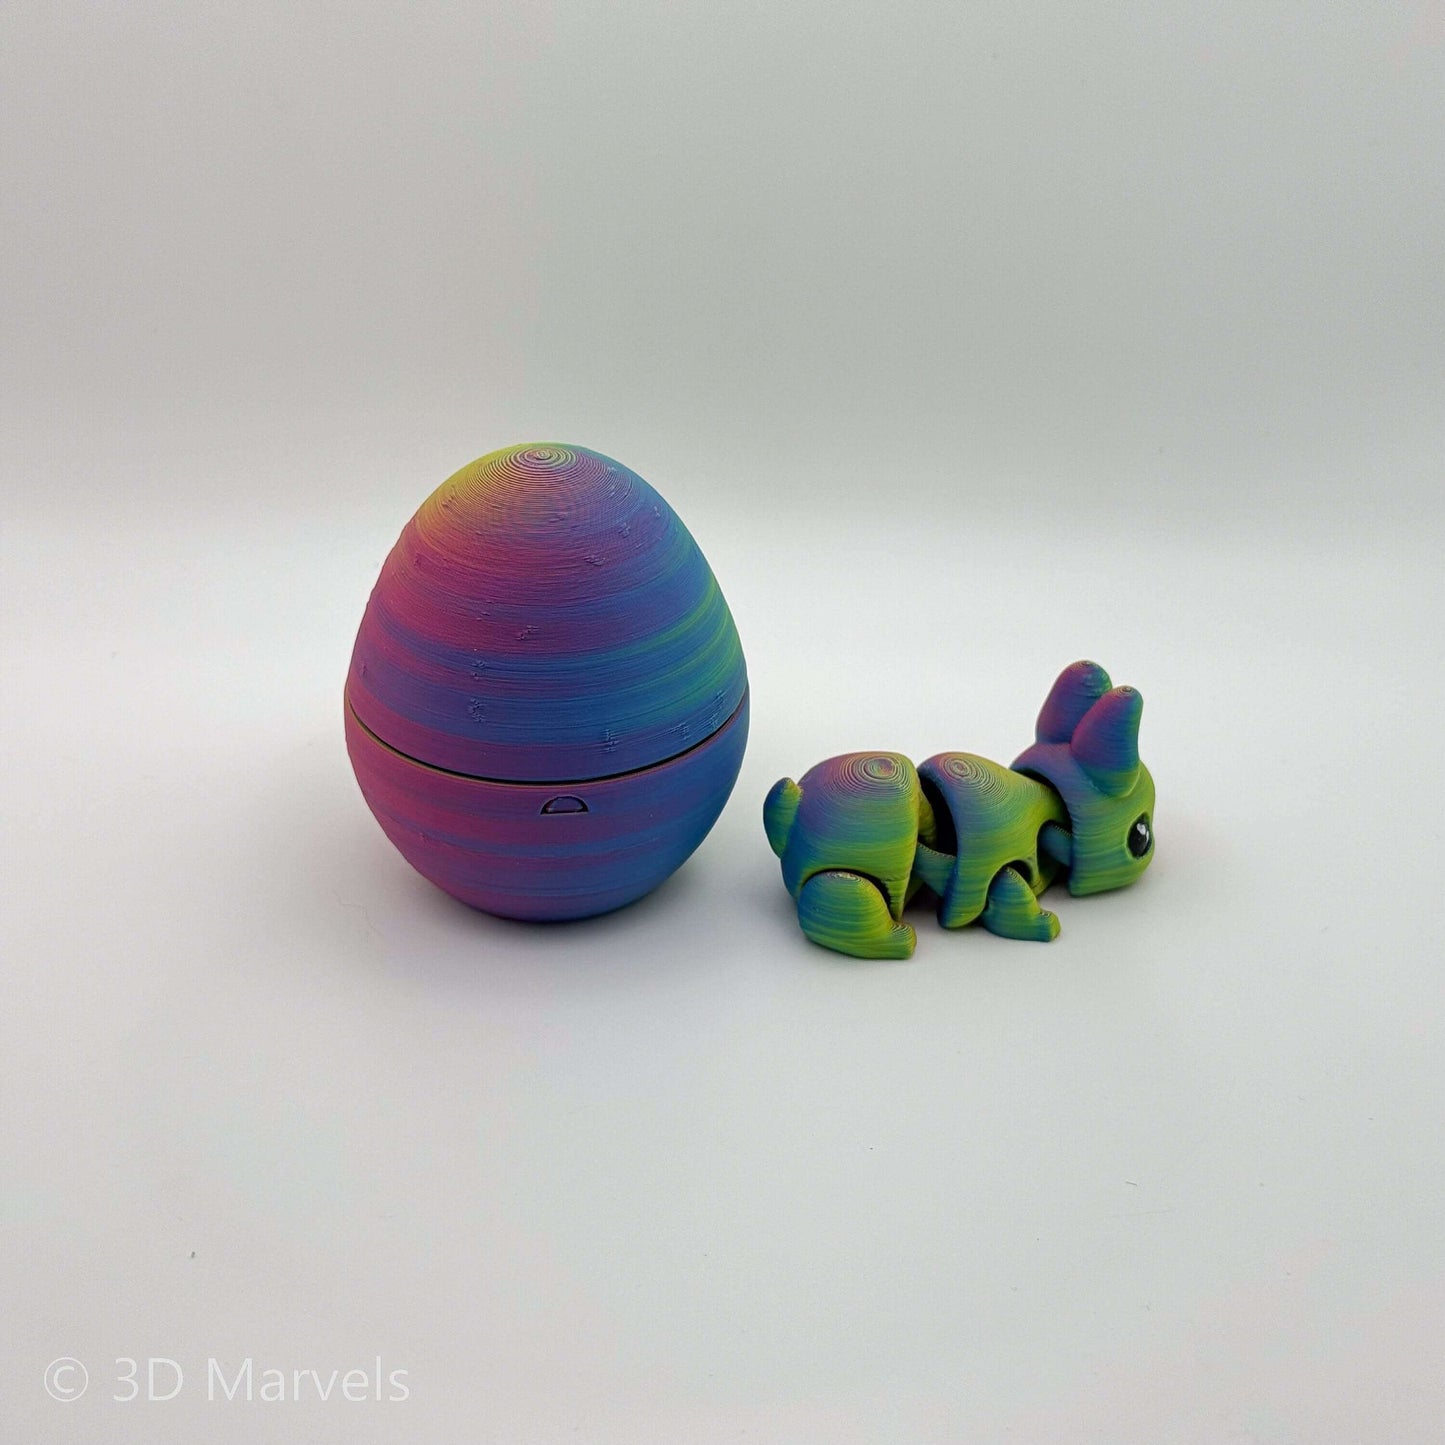 Mini Bunny optional egg, the egg fits one bunny, marvelous Easter gift, or fill the egg with a different surprise